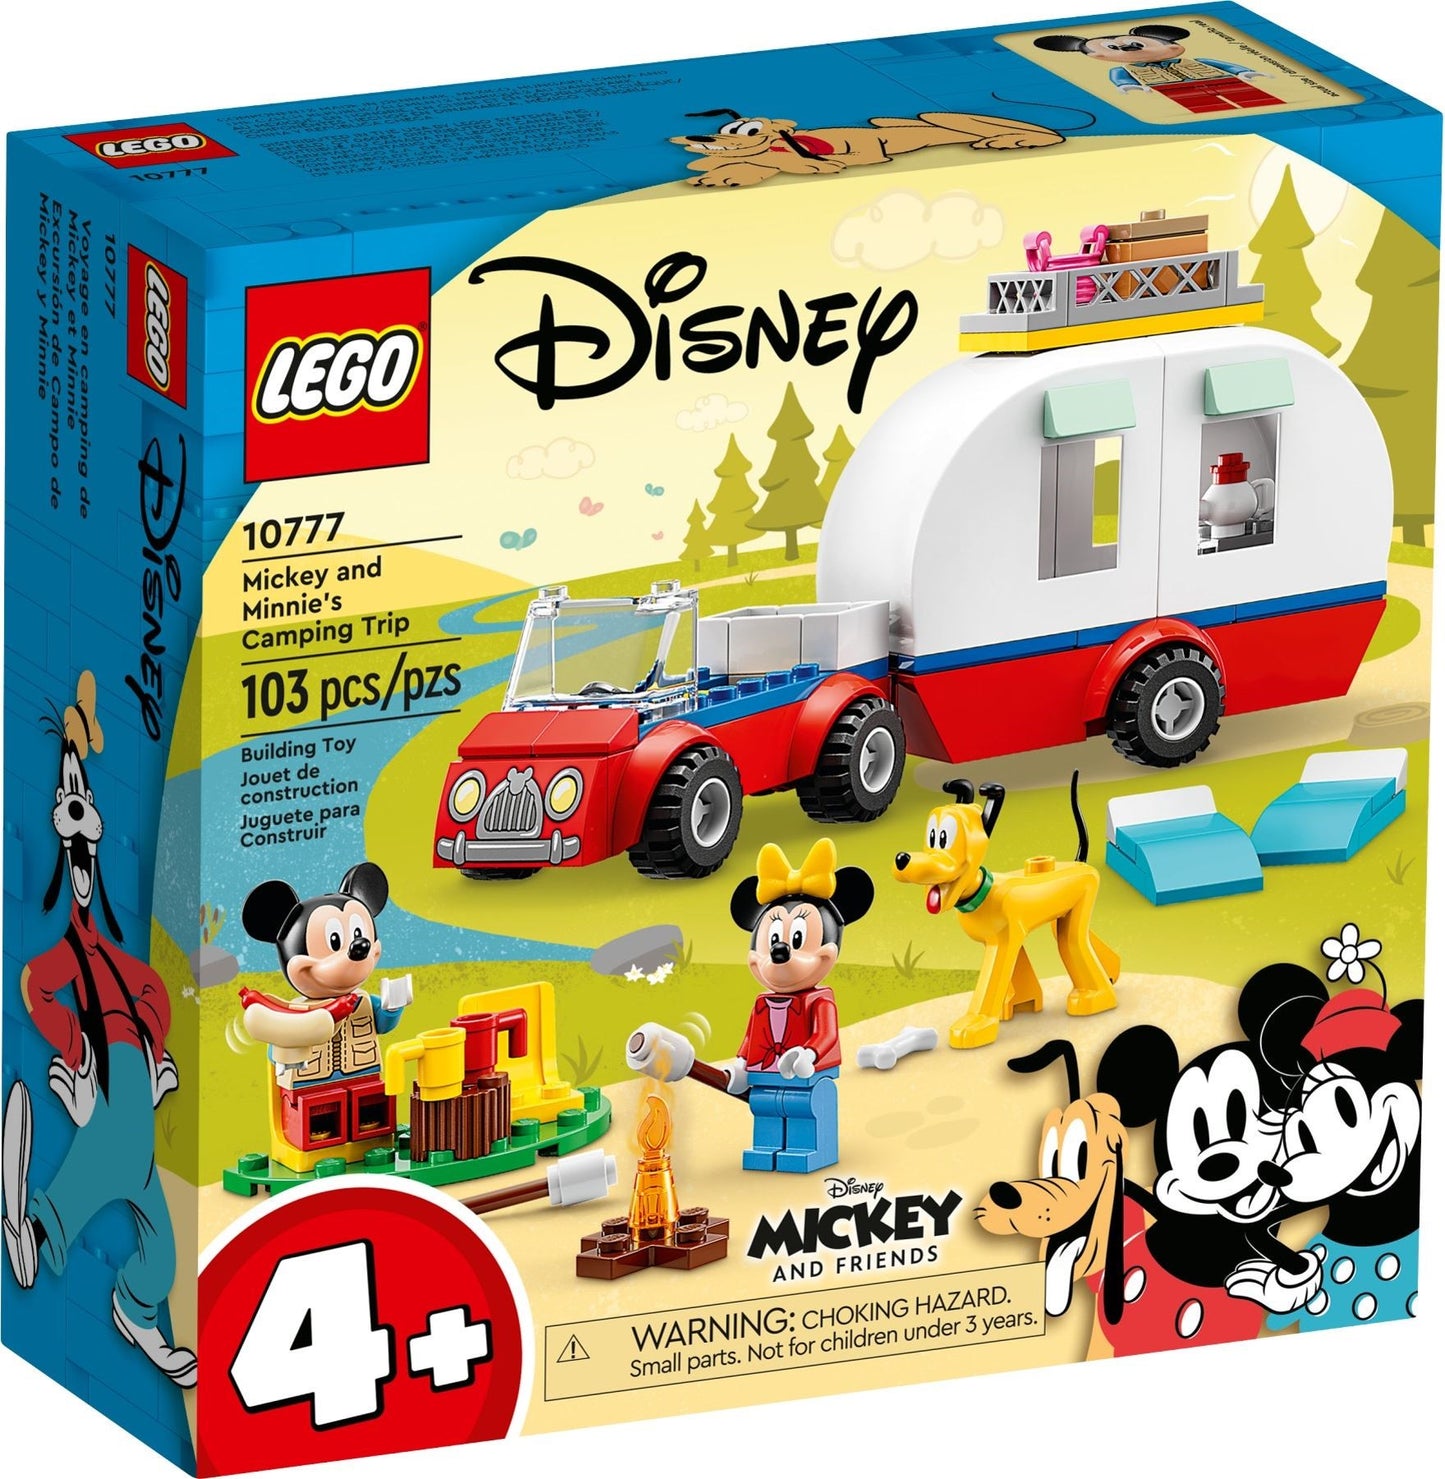 10777 Mickey and Minnie's Camping Trip